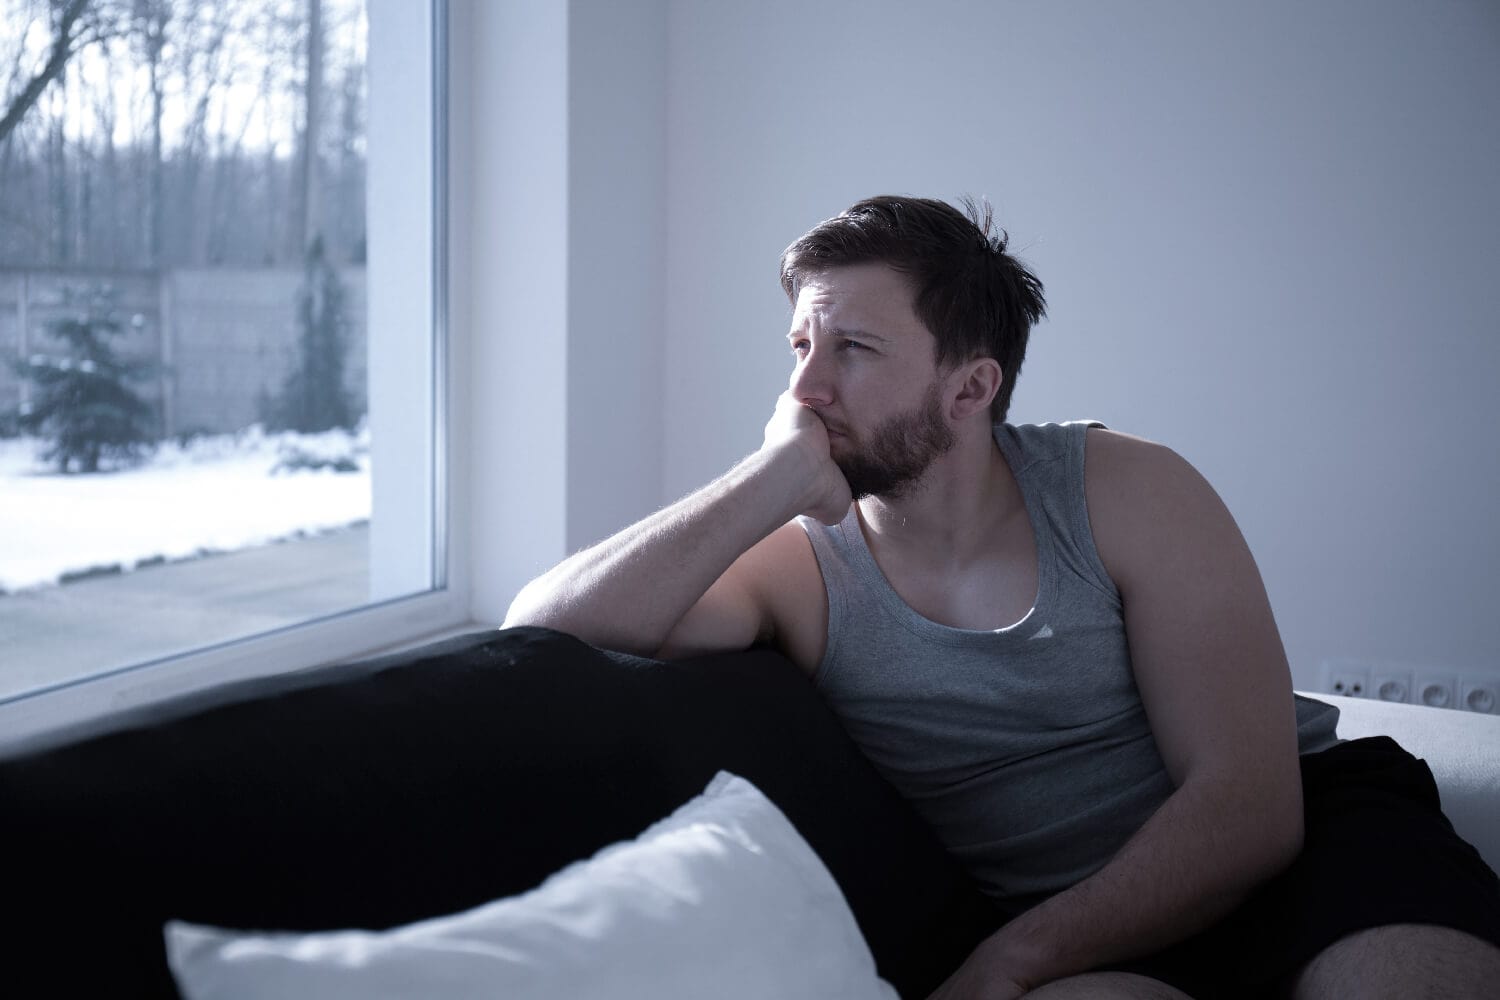 Depressed man sitting on a couch looking outside